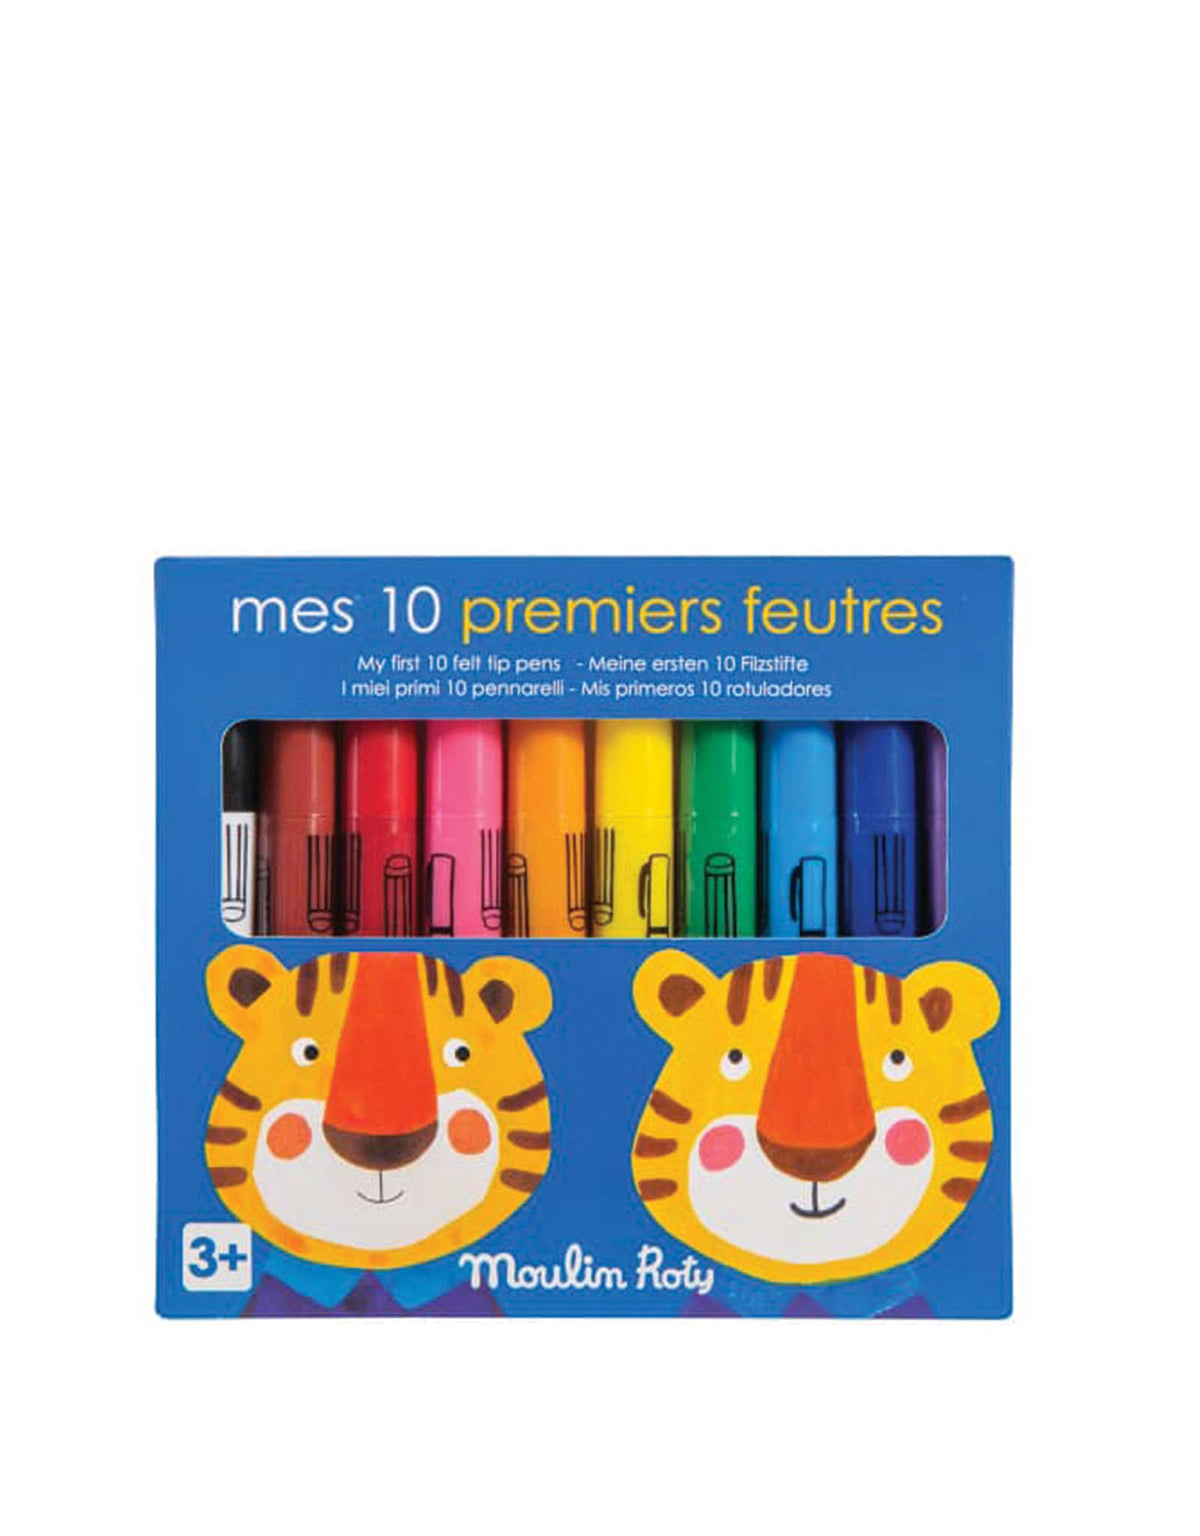 Shop online for Mes 10 premiers crayons de feutres - Les Popipop - Moulin  Roty Moulin Roty at the factory price wholesale